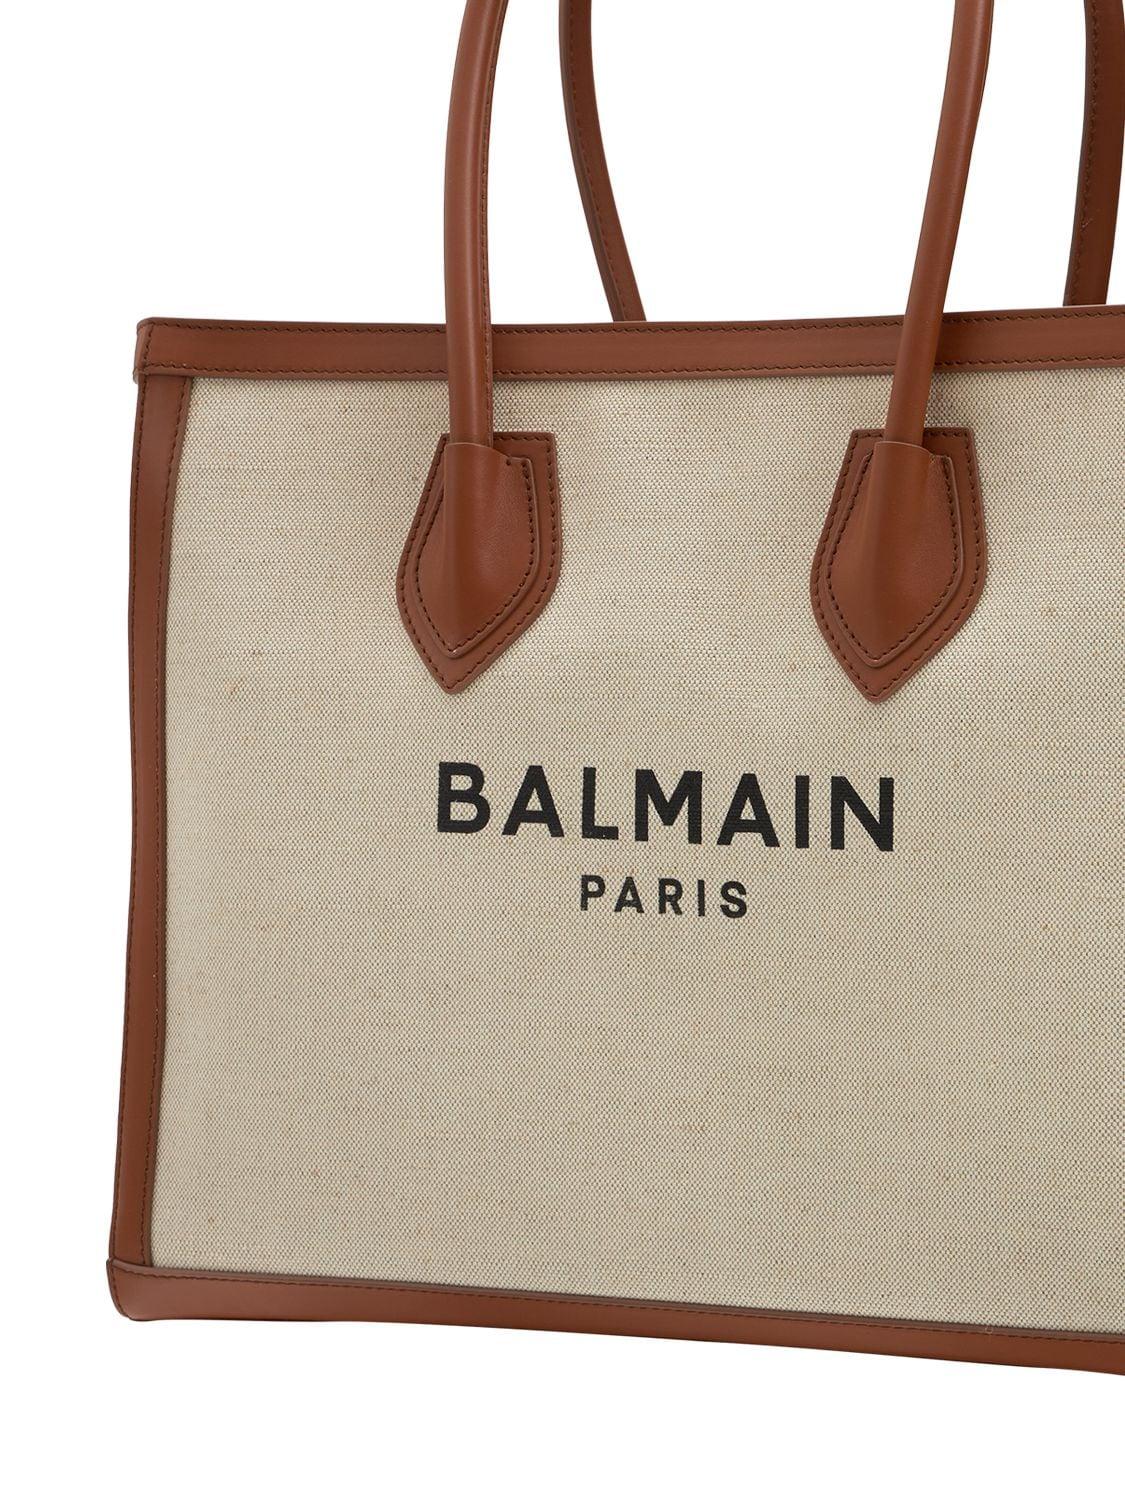 Balmain B-army 42 Canvas & Leather Tote in Natural | Lyst